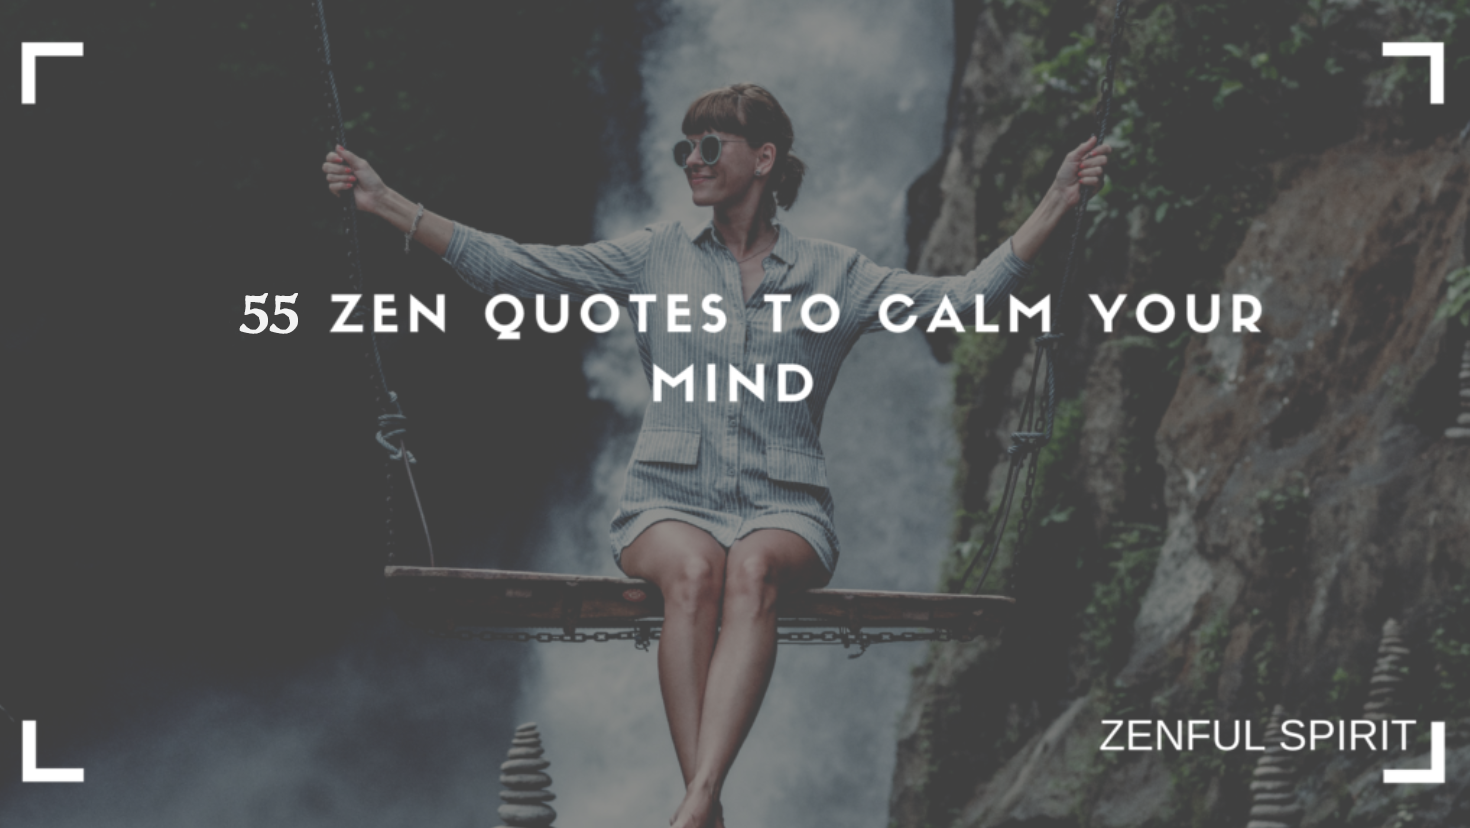 Zen Quotes to Calm Your Mind